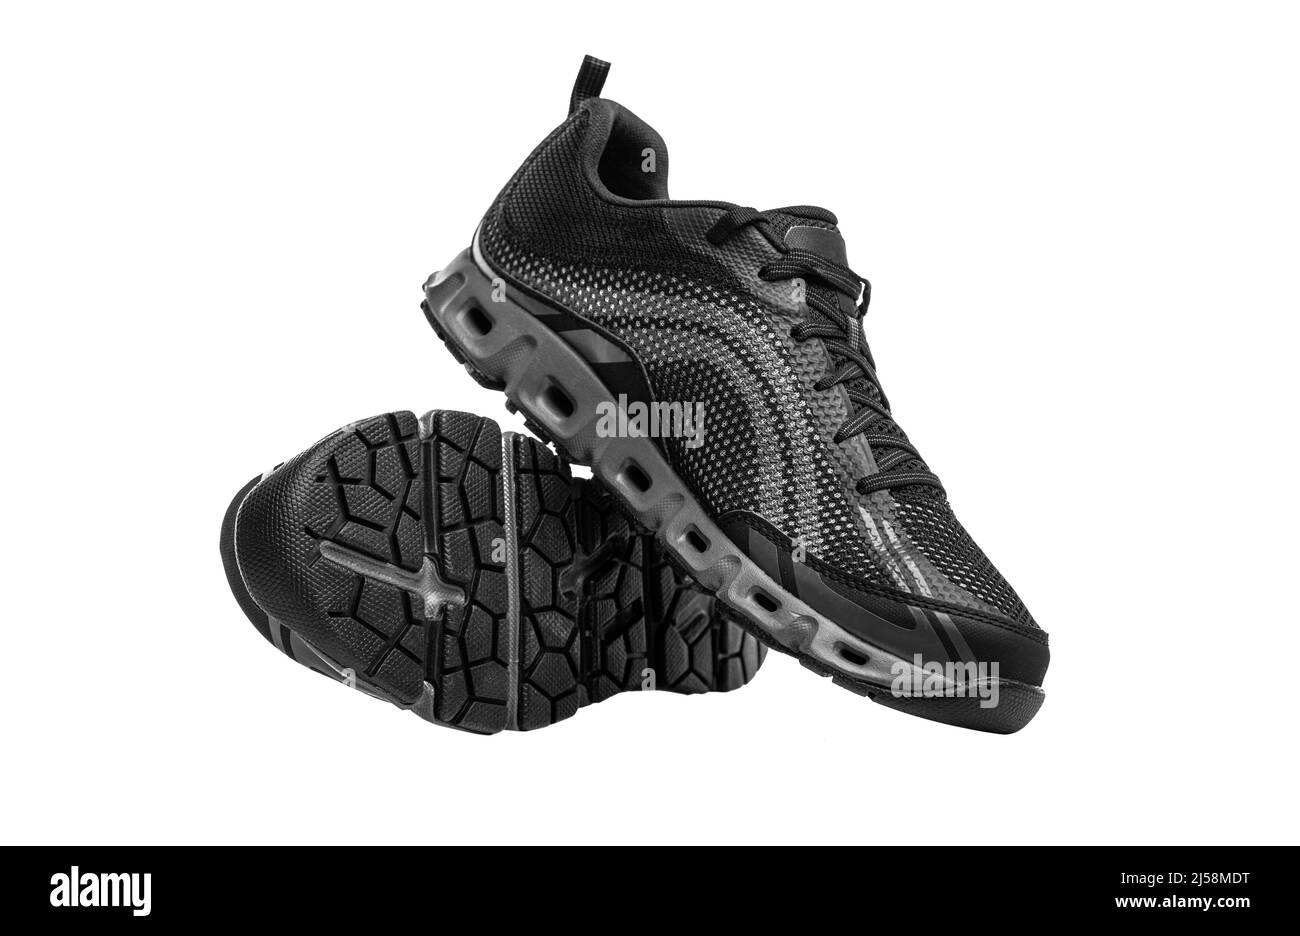 Black sneakers running shoes. Stock Photo